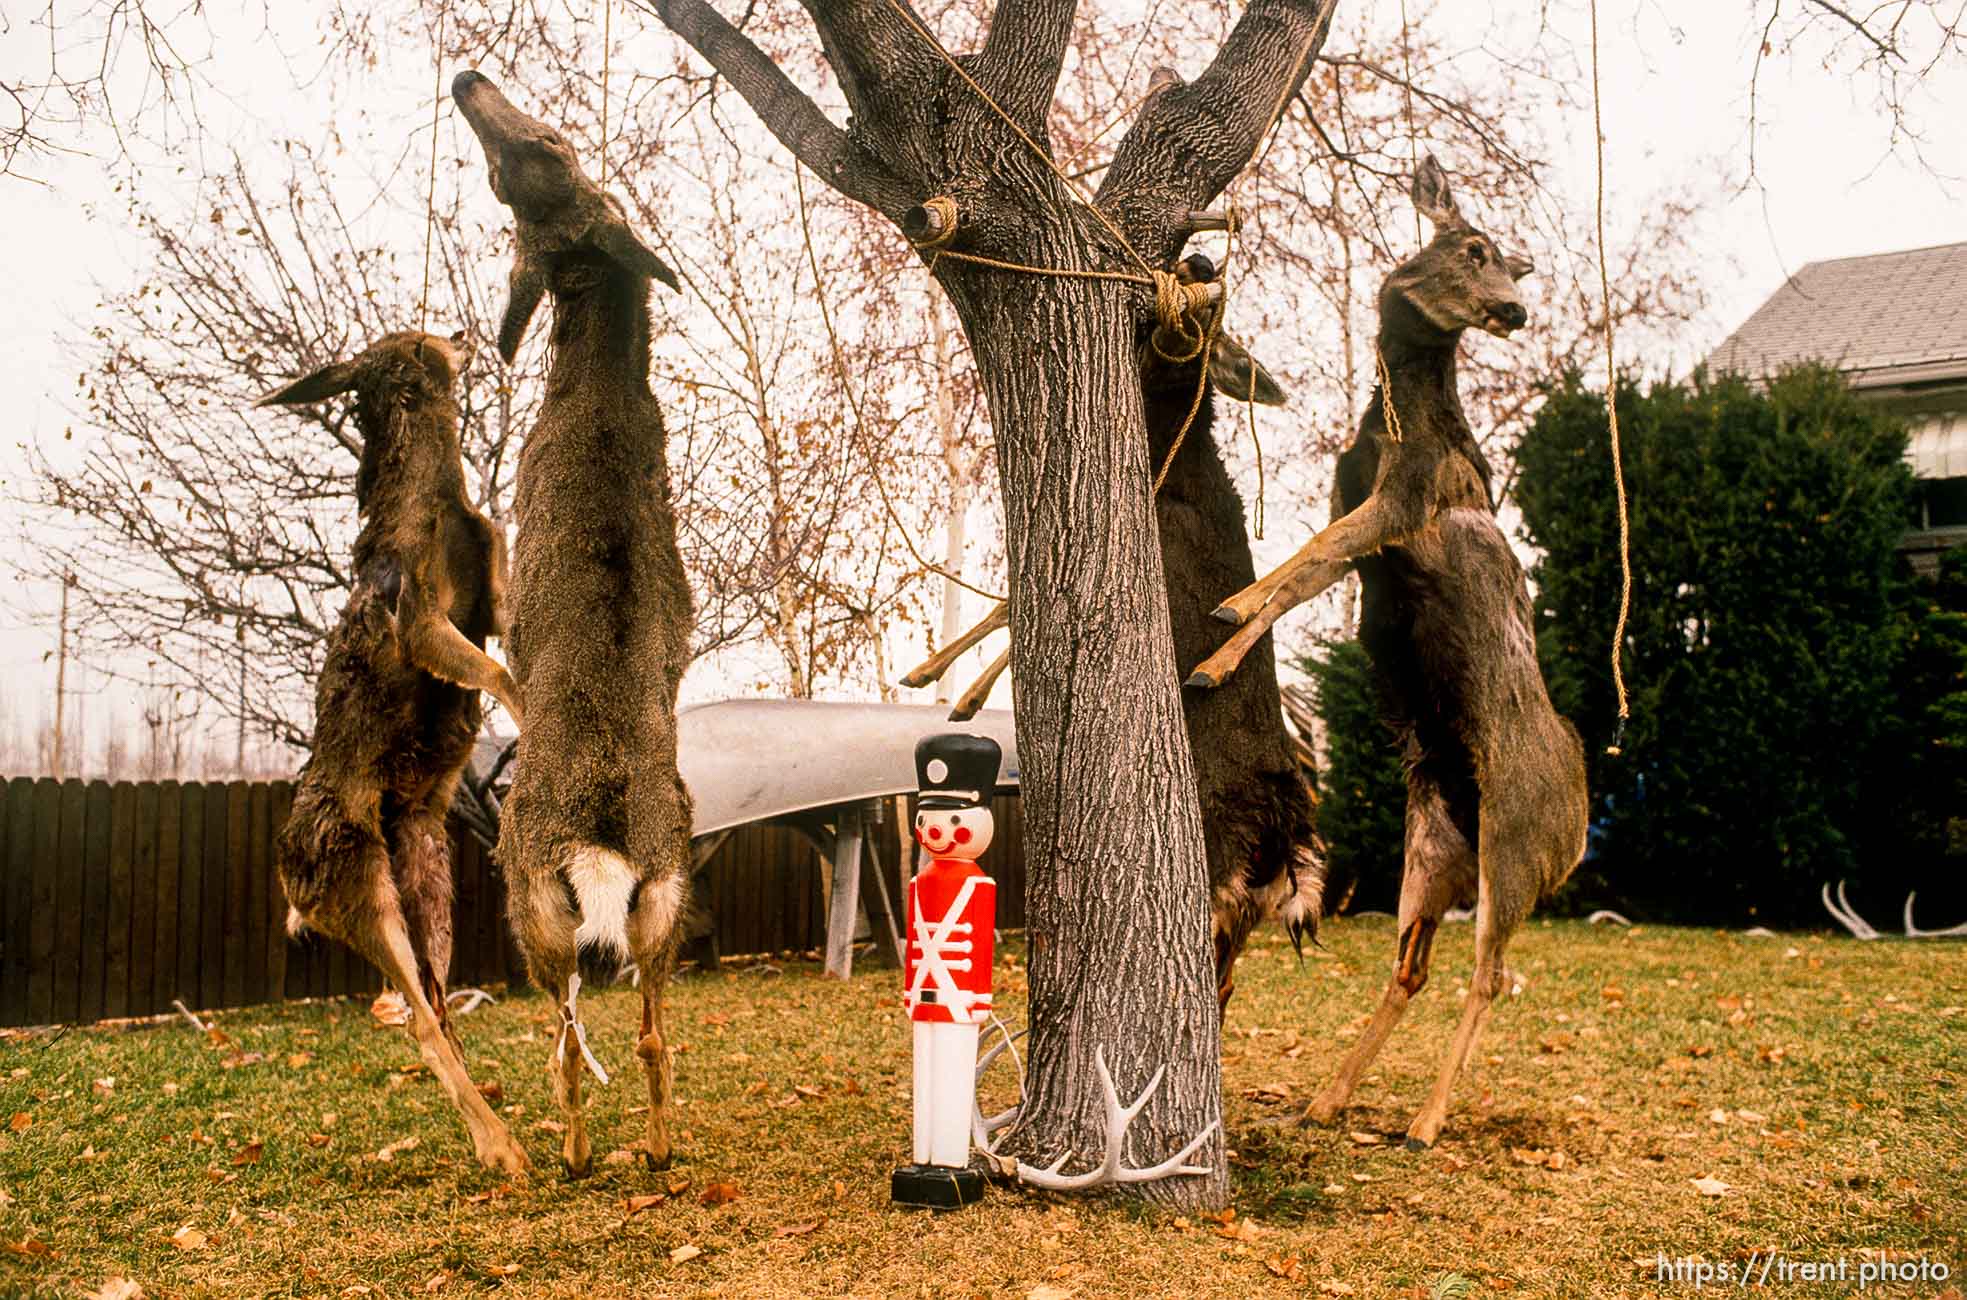 Smiling Christmas soldier in front of three dead deer, hanging from a tree.